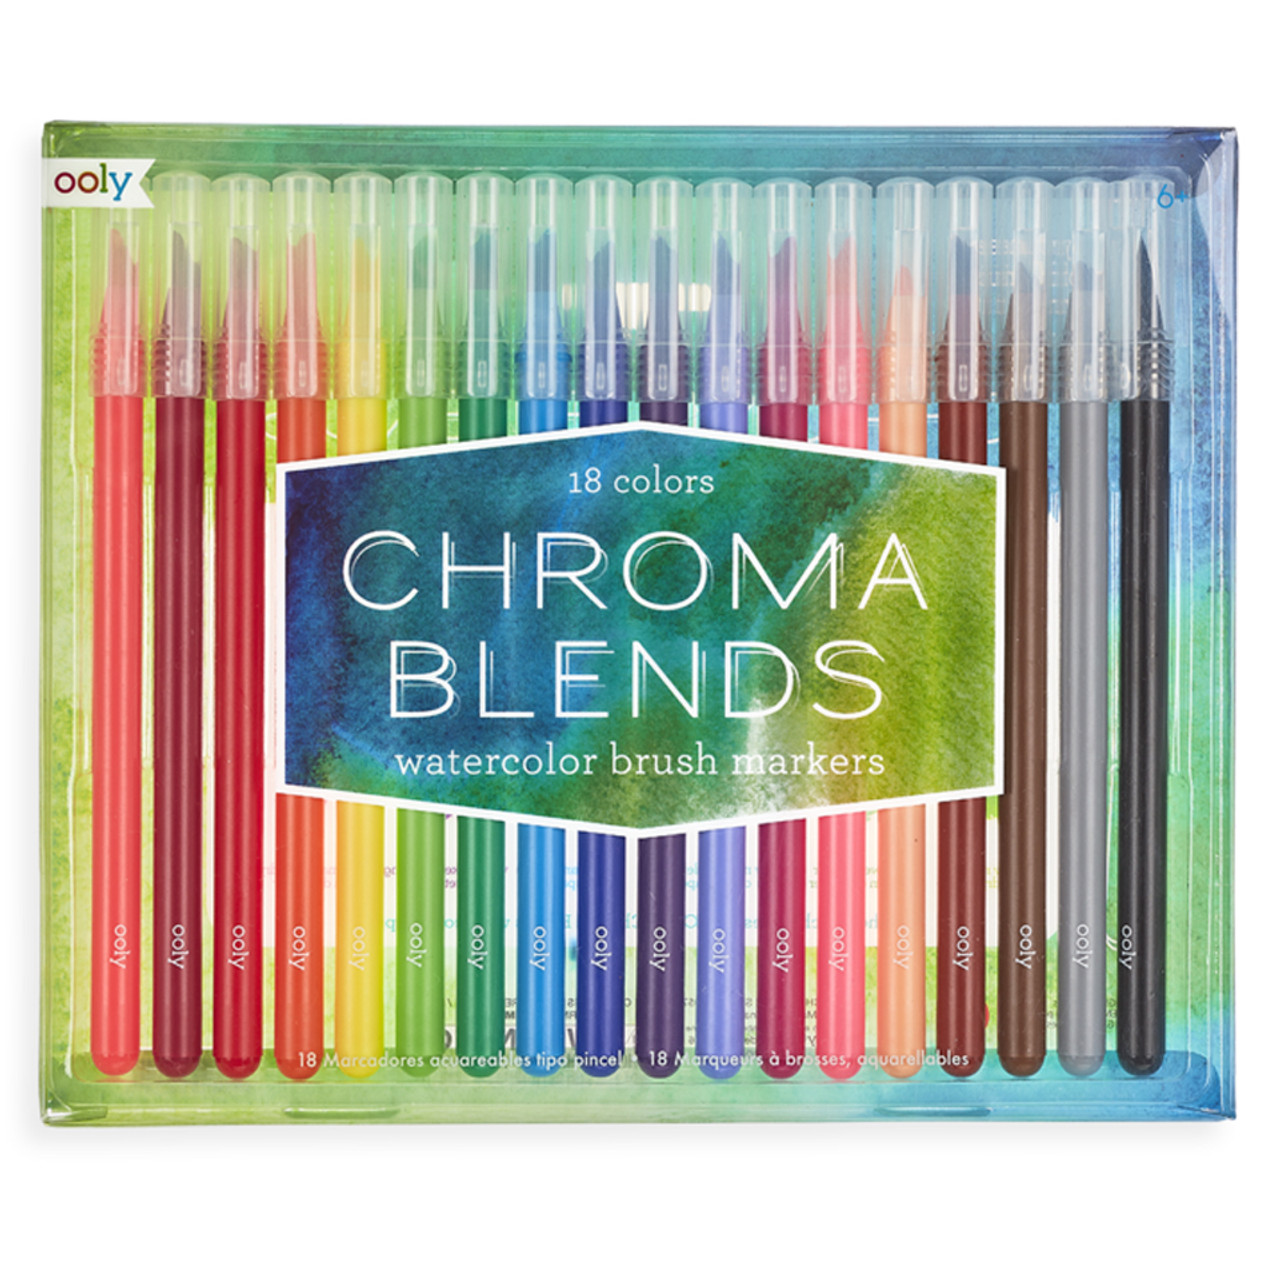 Chroma Blend Watercolor Brush Markers - Altiplano